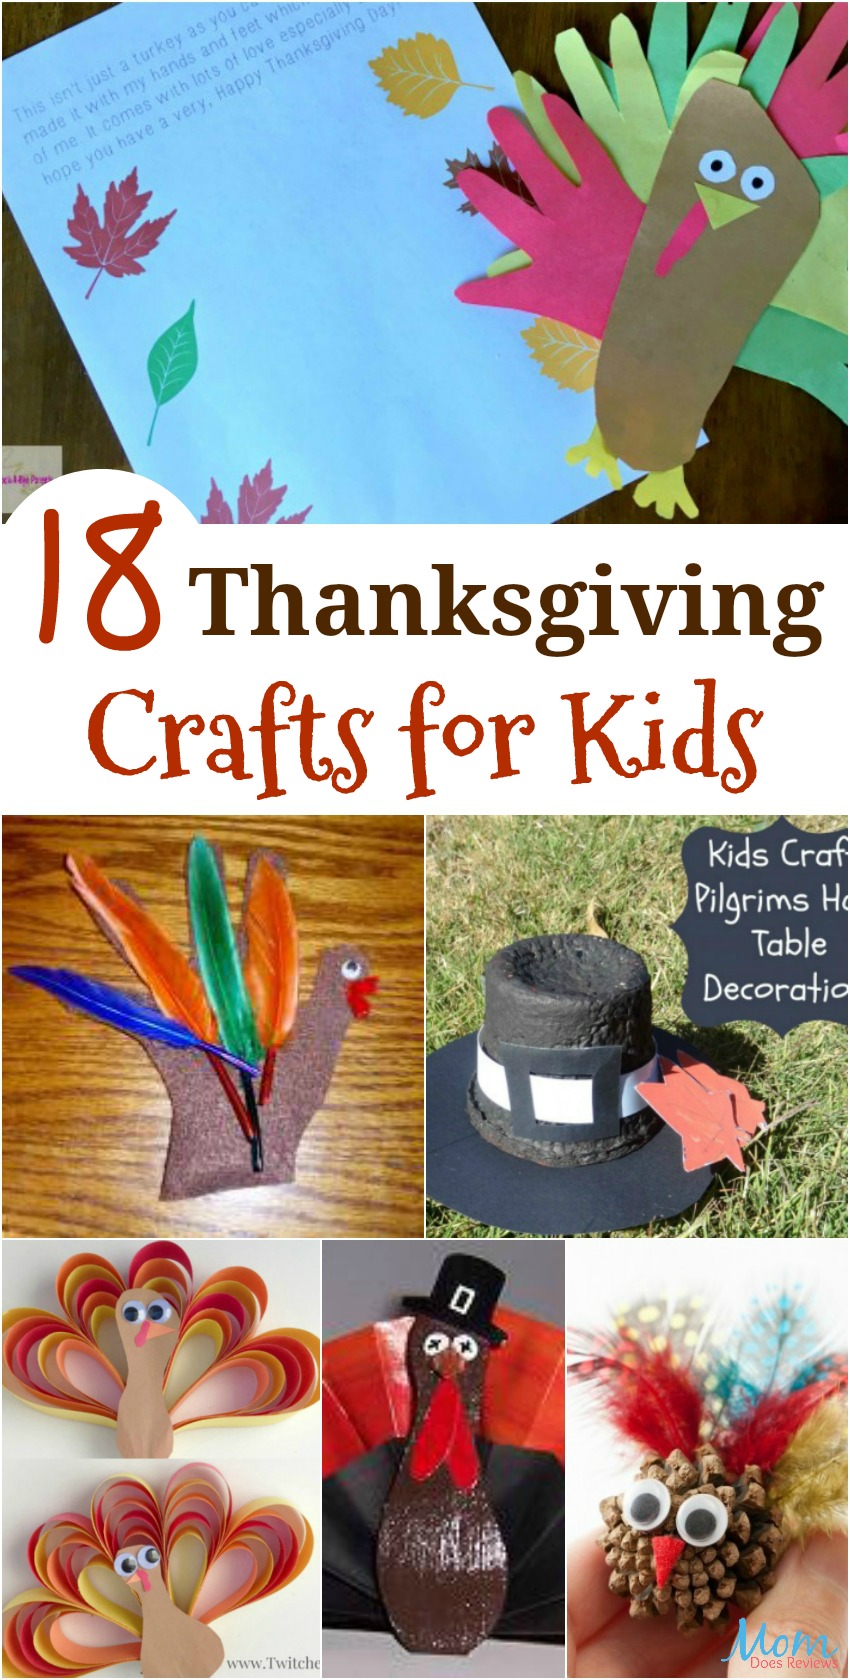 18 Thanksgiving Crafts for Kids they will Love and Enjoy